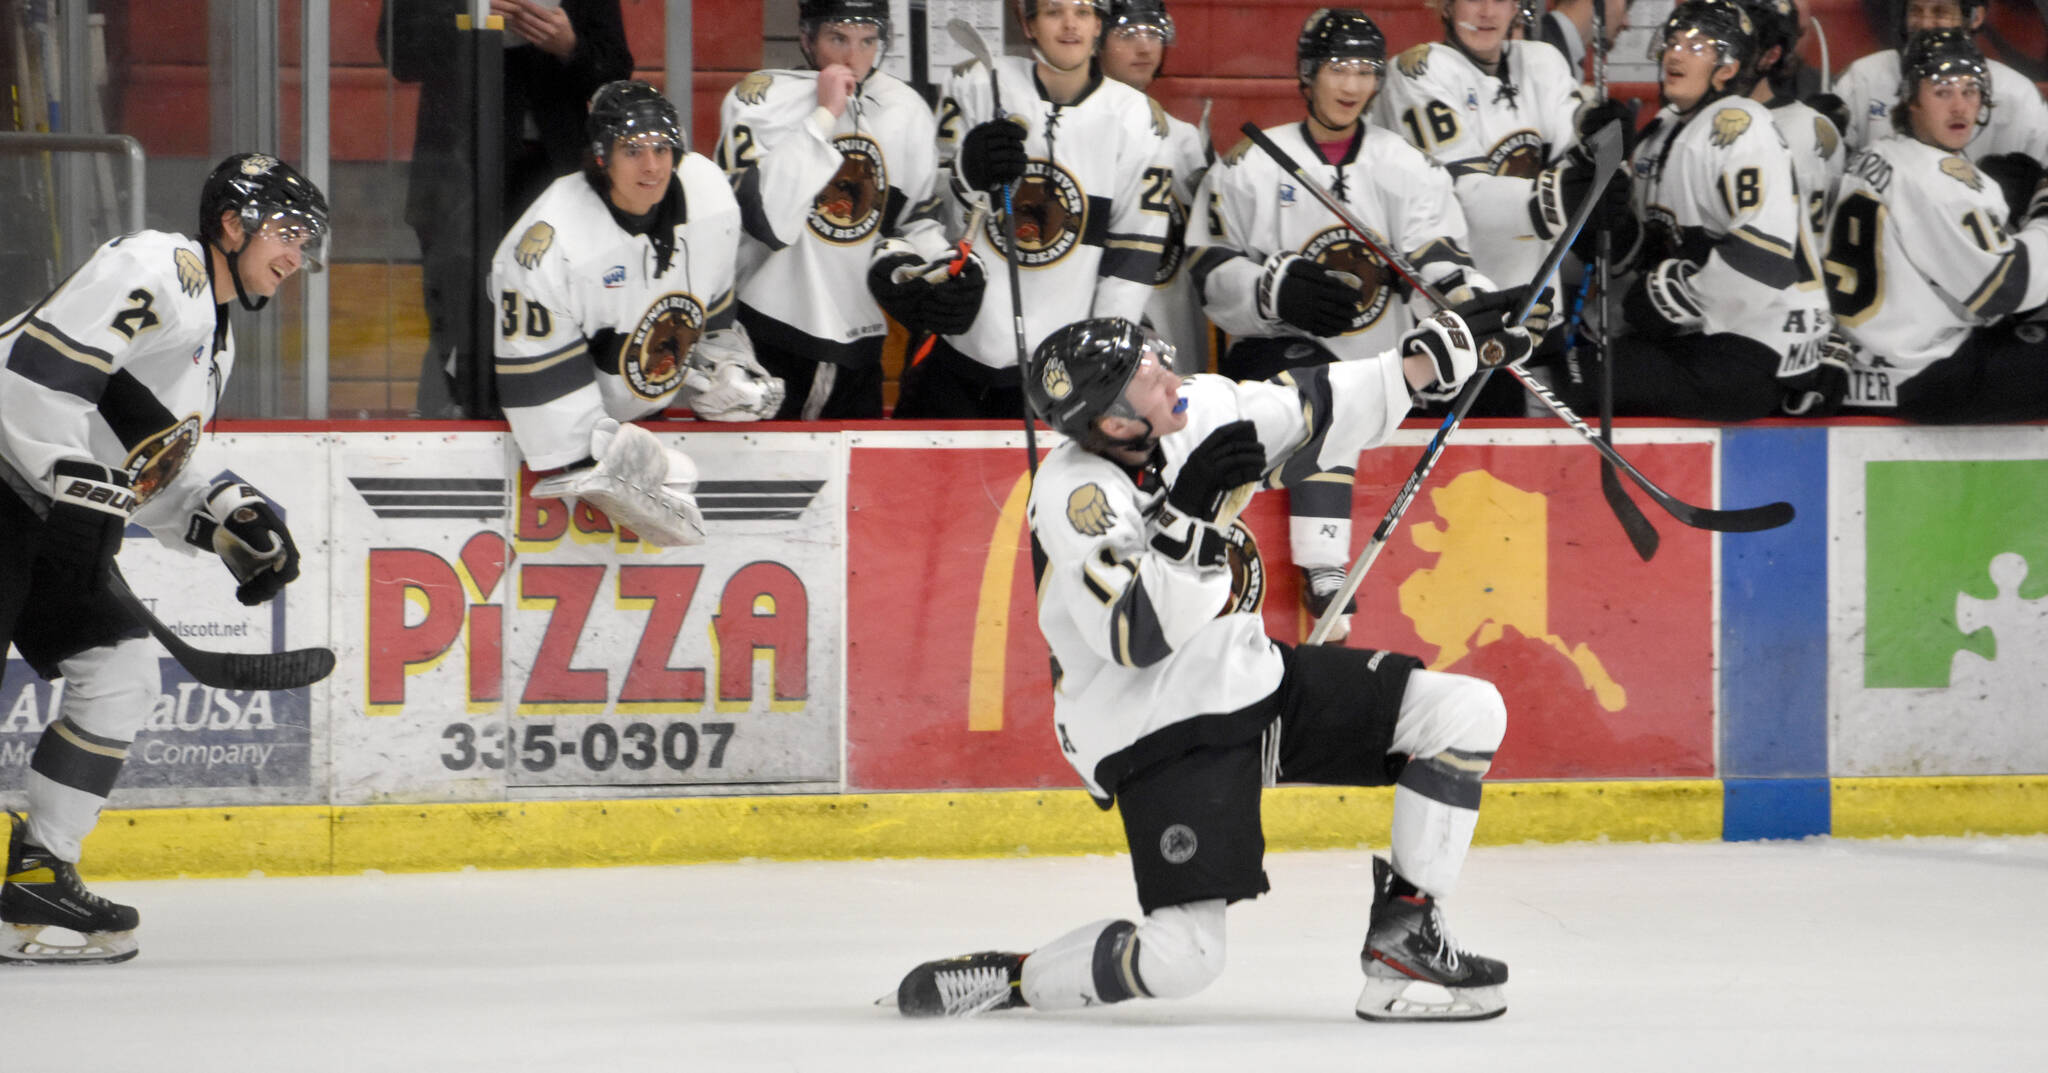 Bryce Monrean of the Kenai River Brown Bears celebrates his second-period goal against the Wisconsin Windigo on Saturday, Oct. 22, 2022, at the Soldotna Regional Sports Complex in Soldotna, Alaska. (Photo by Jeff Helminiak/Peninsula Clarion)